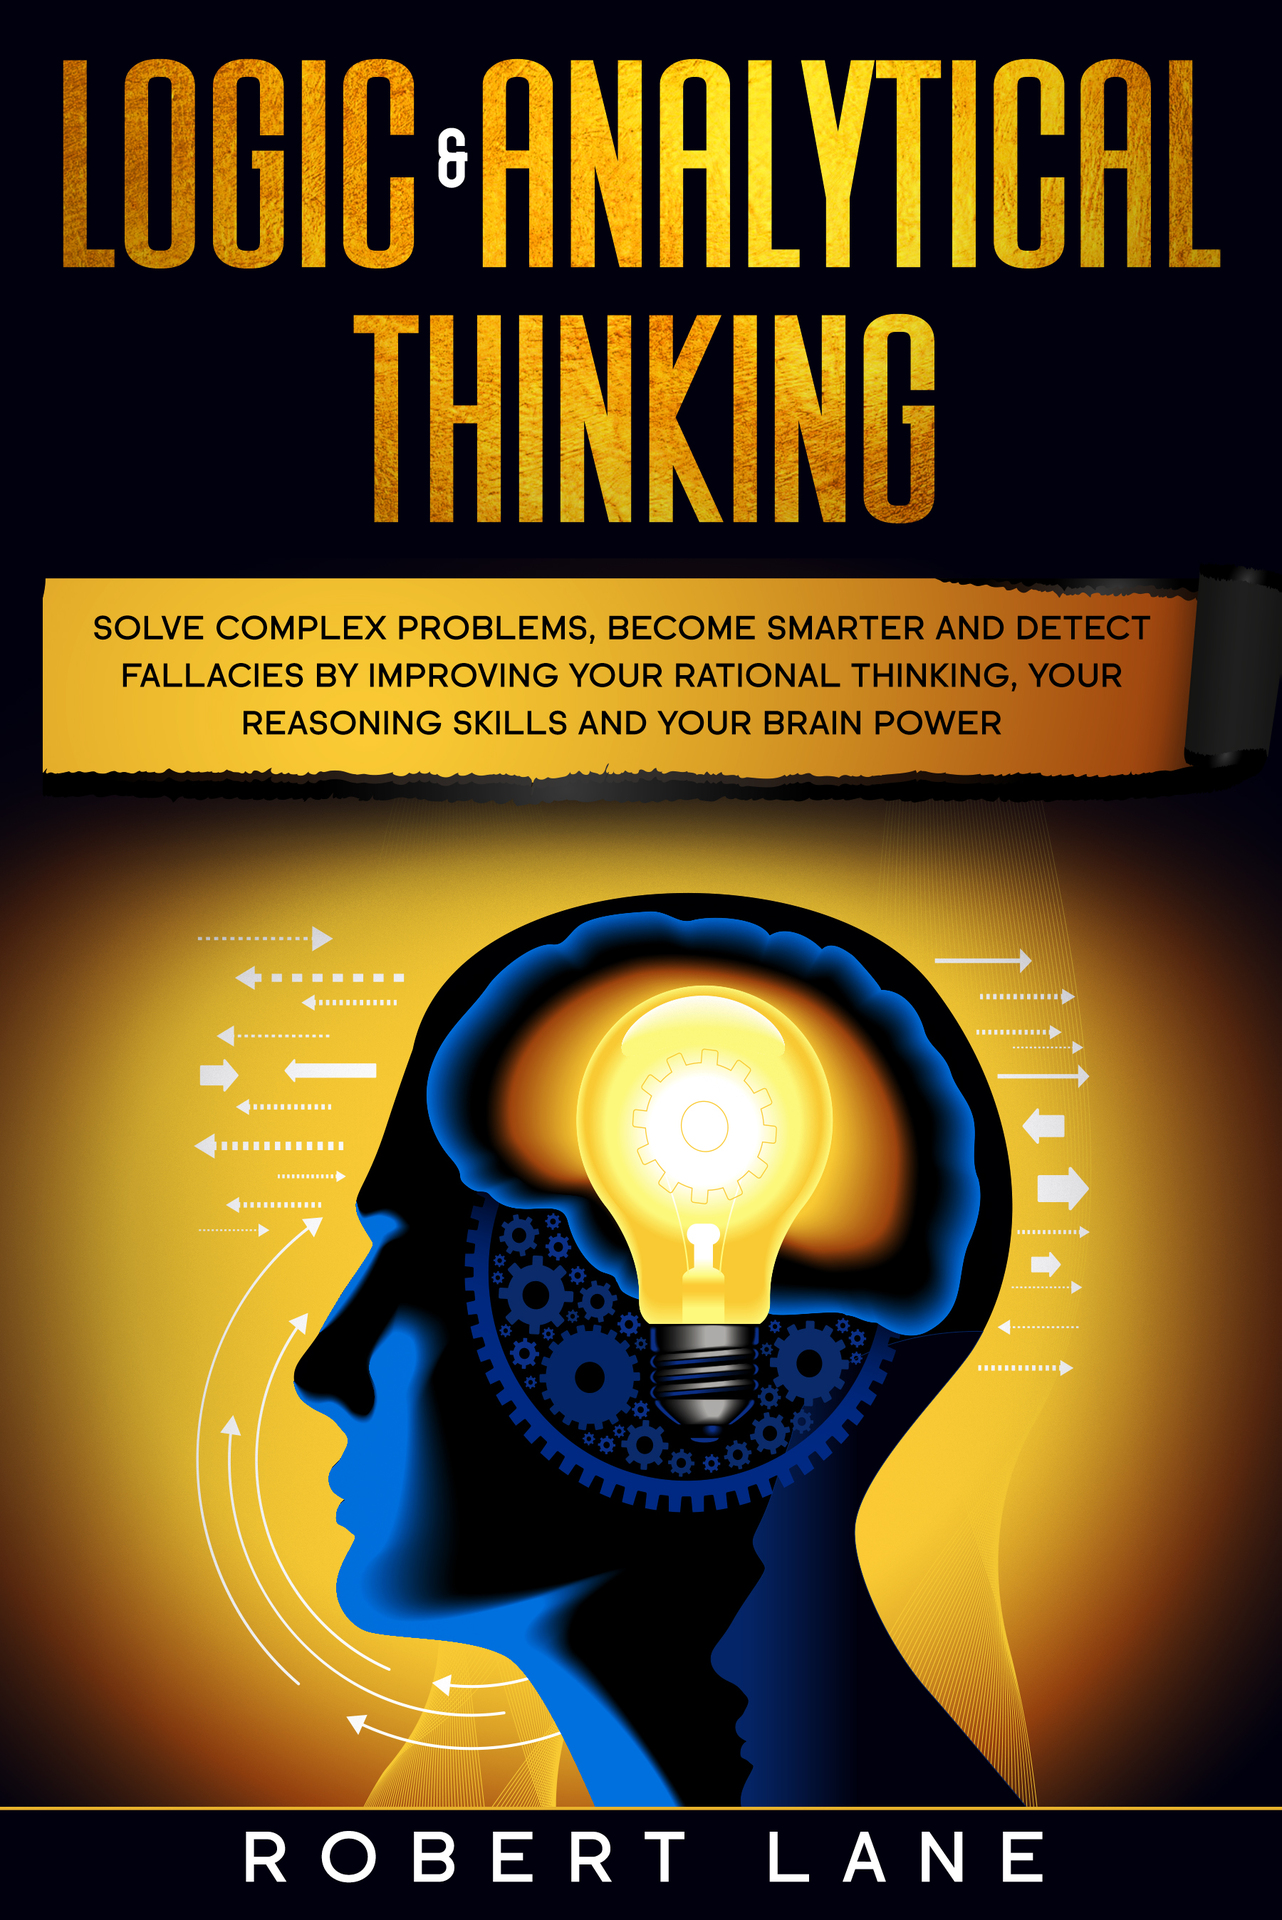 Logic & Analytical Thinking: Solve complex problems, become smarter and detect fallacies by Improving your rational thinking, your reasoning skills and your brain power